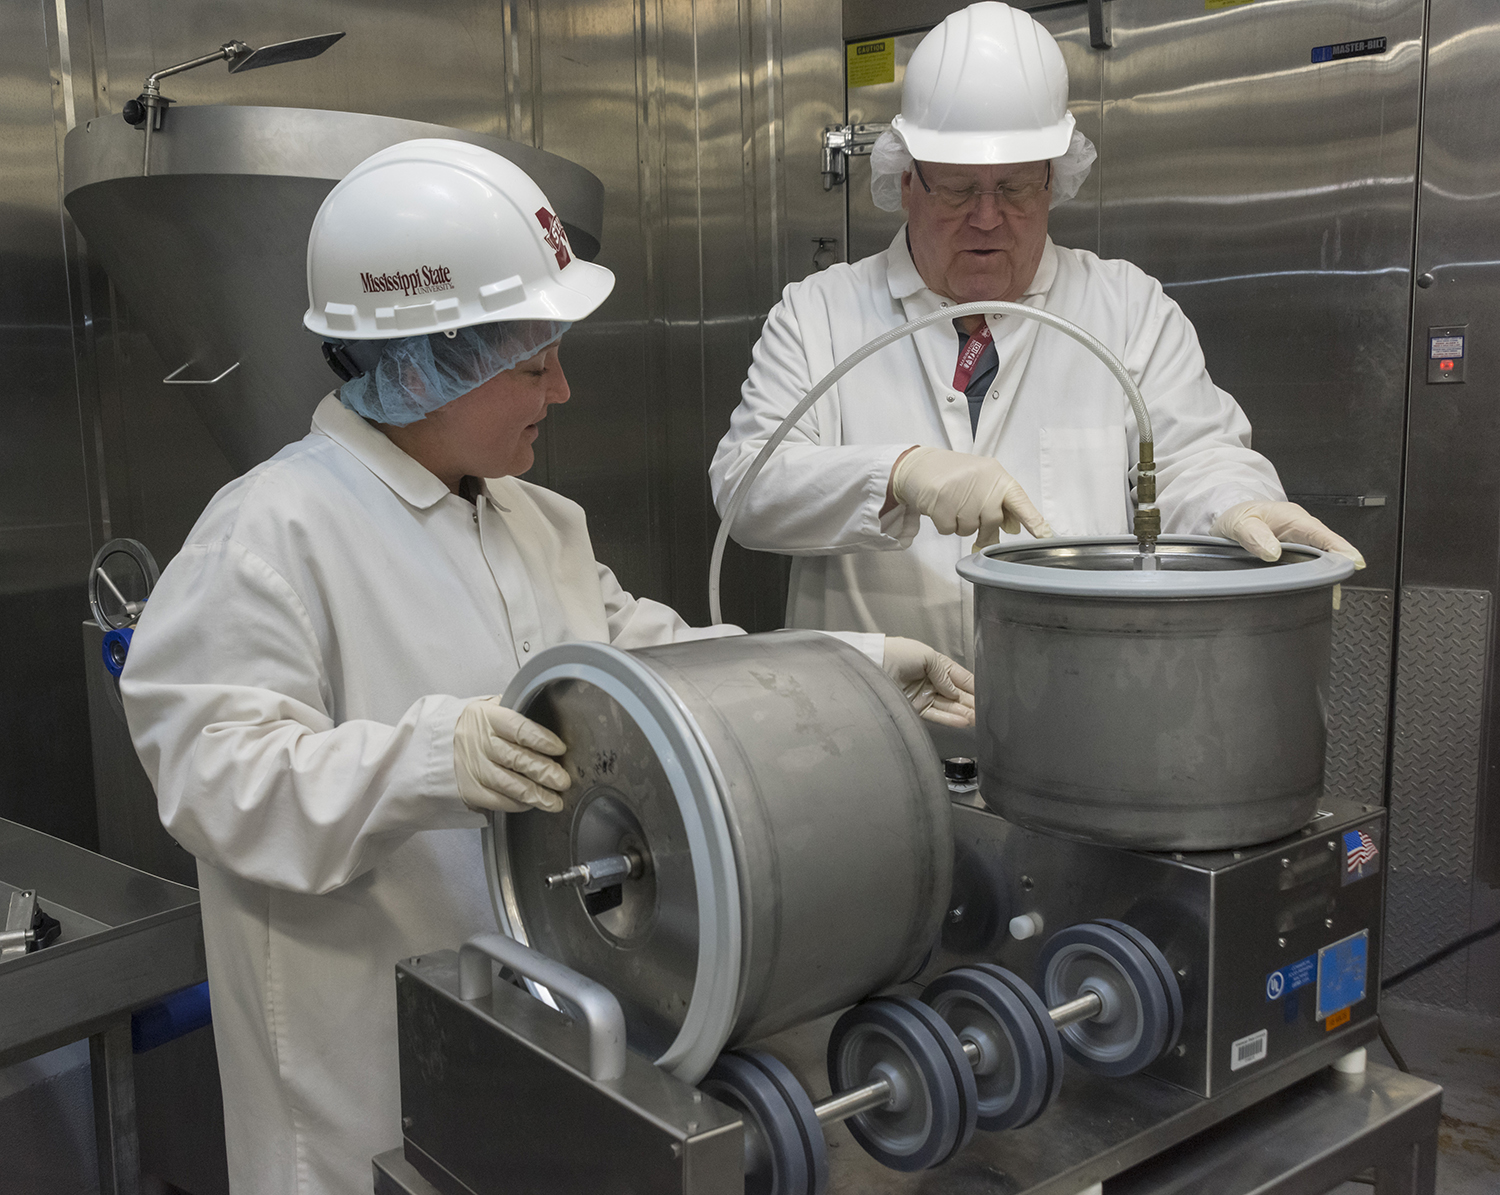 A woman and a man wearing lab coats, hard hats, and hair nets operating equipment in a lab.